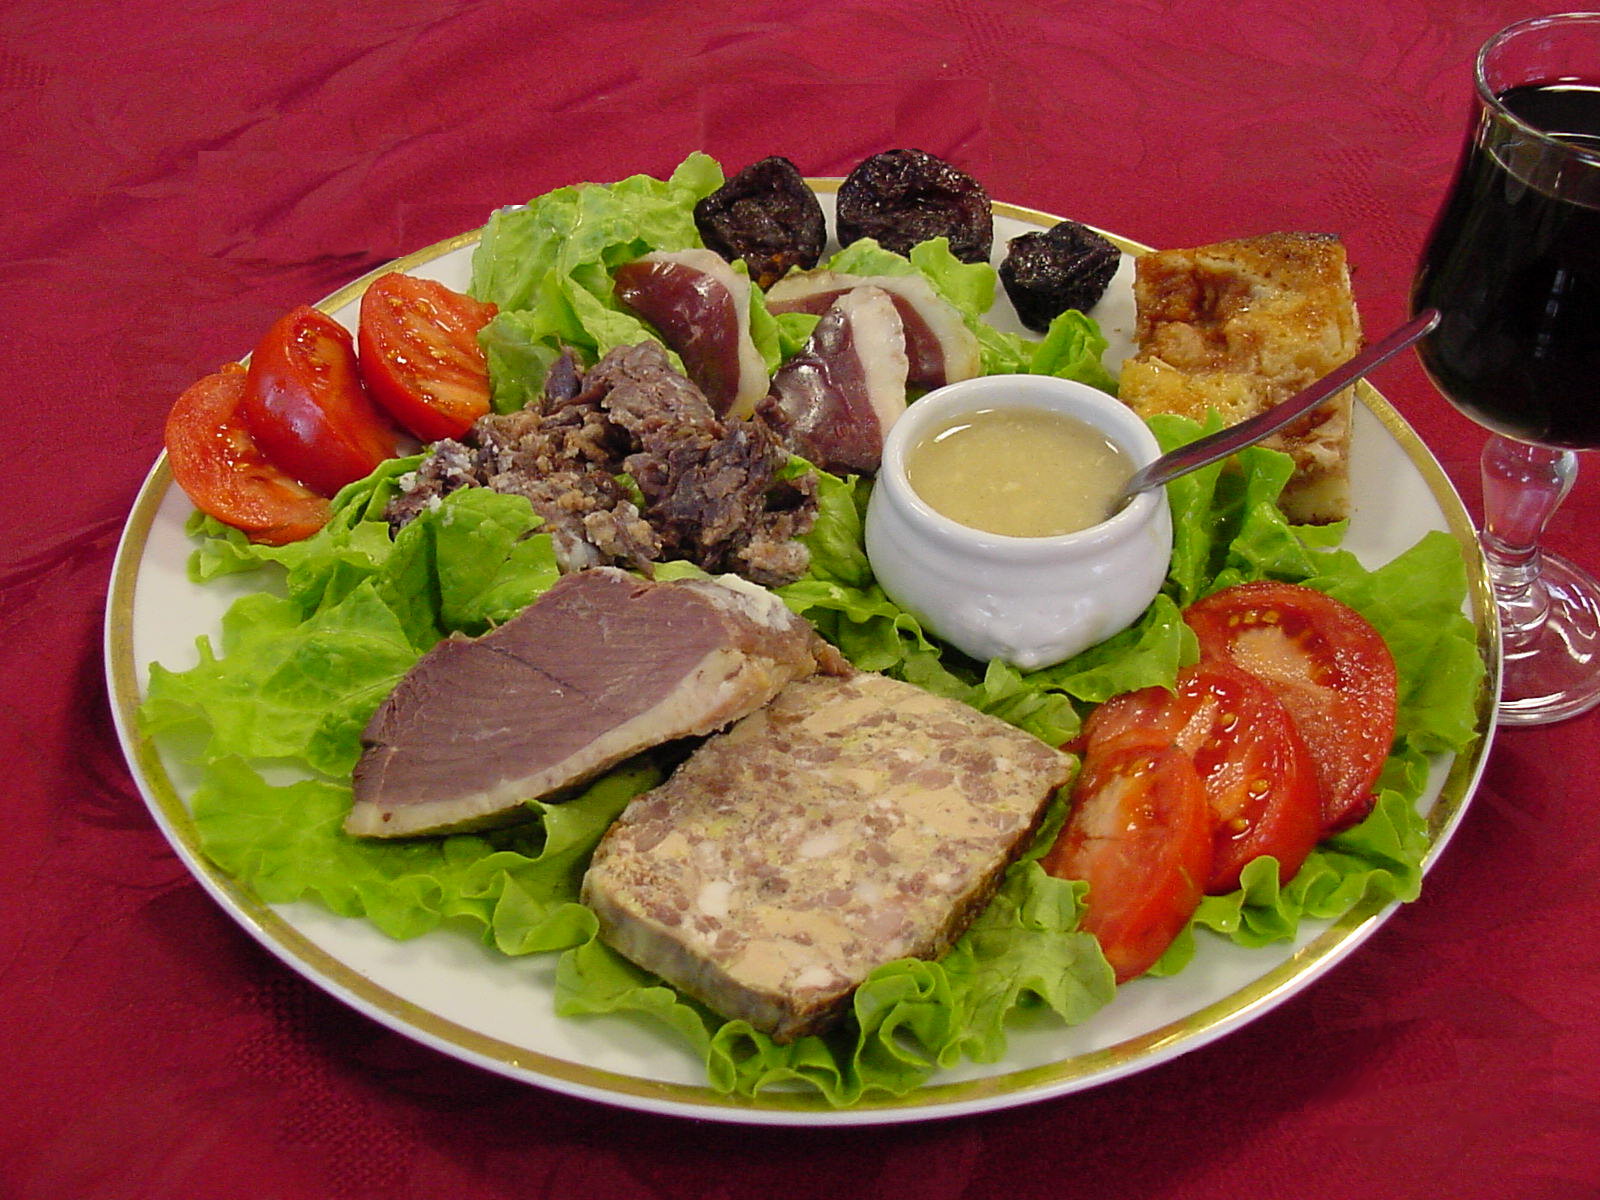 a plate with meat, tomatoes, lettuce and bread